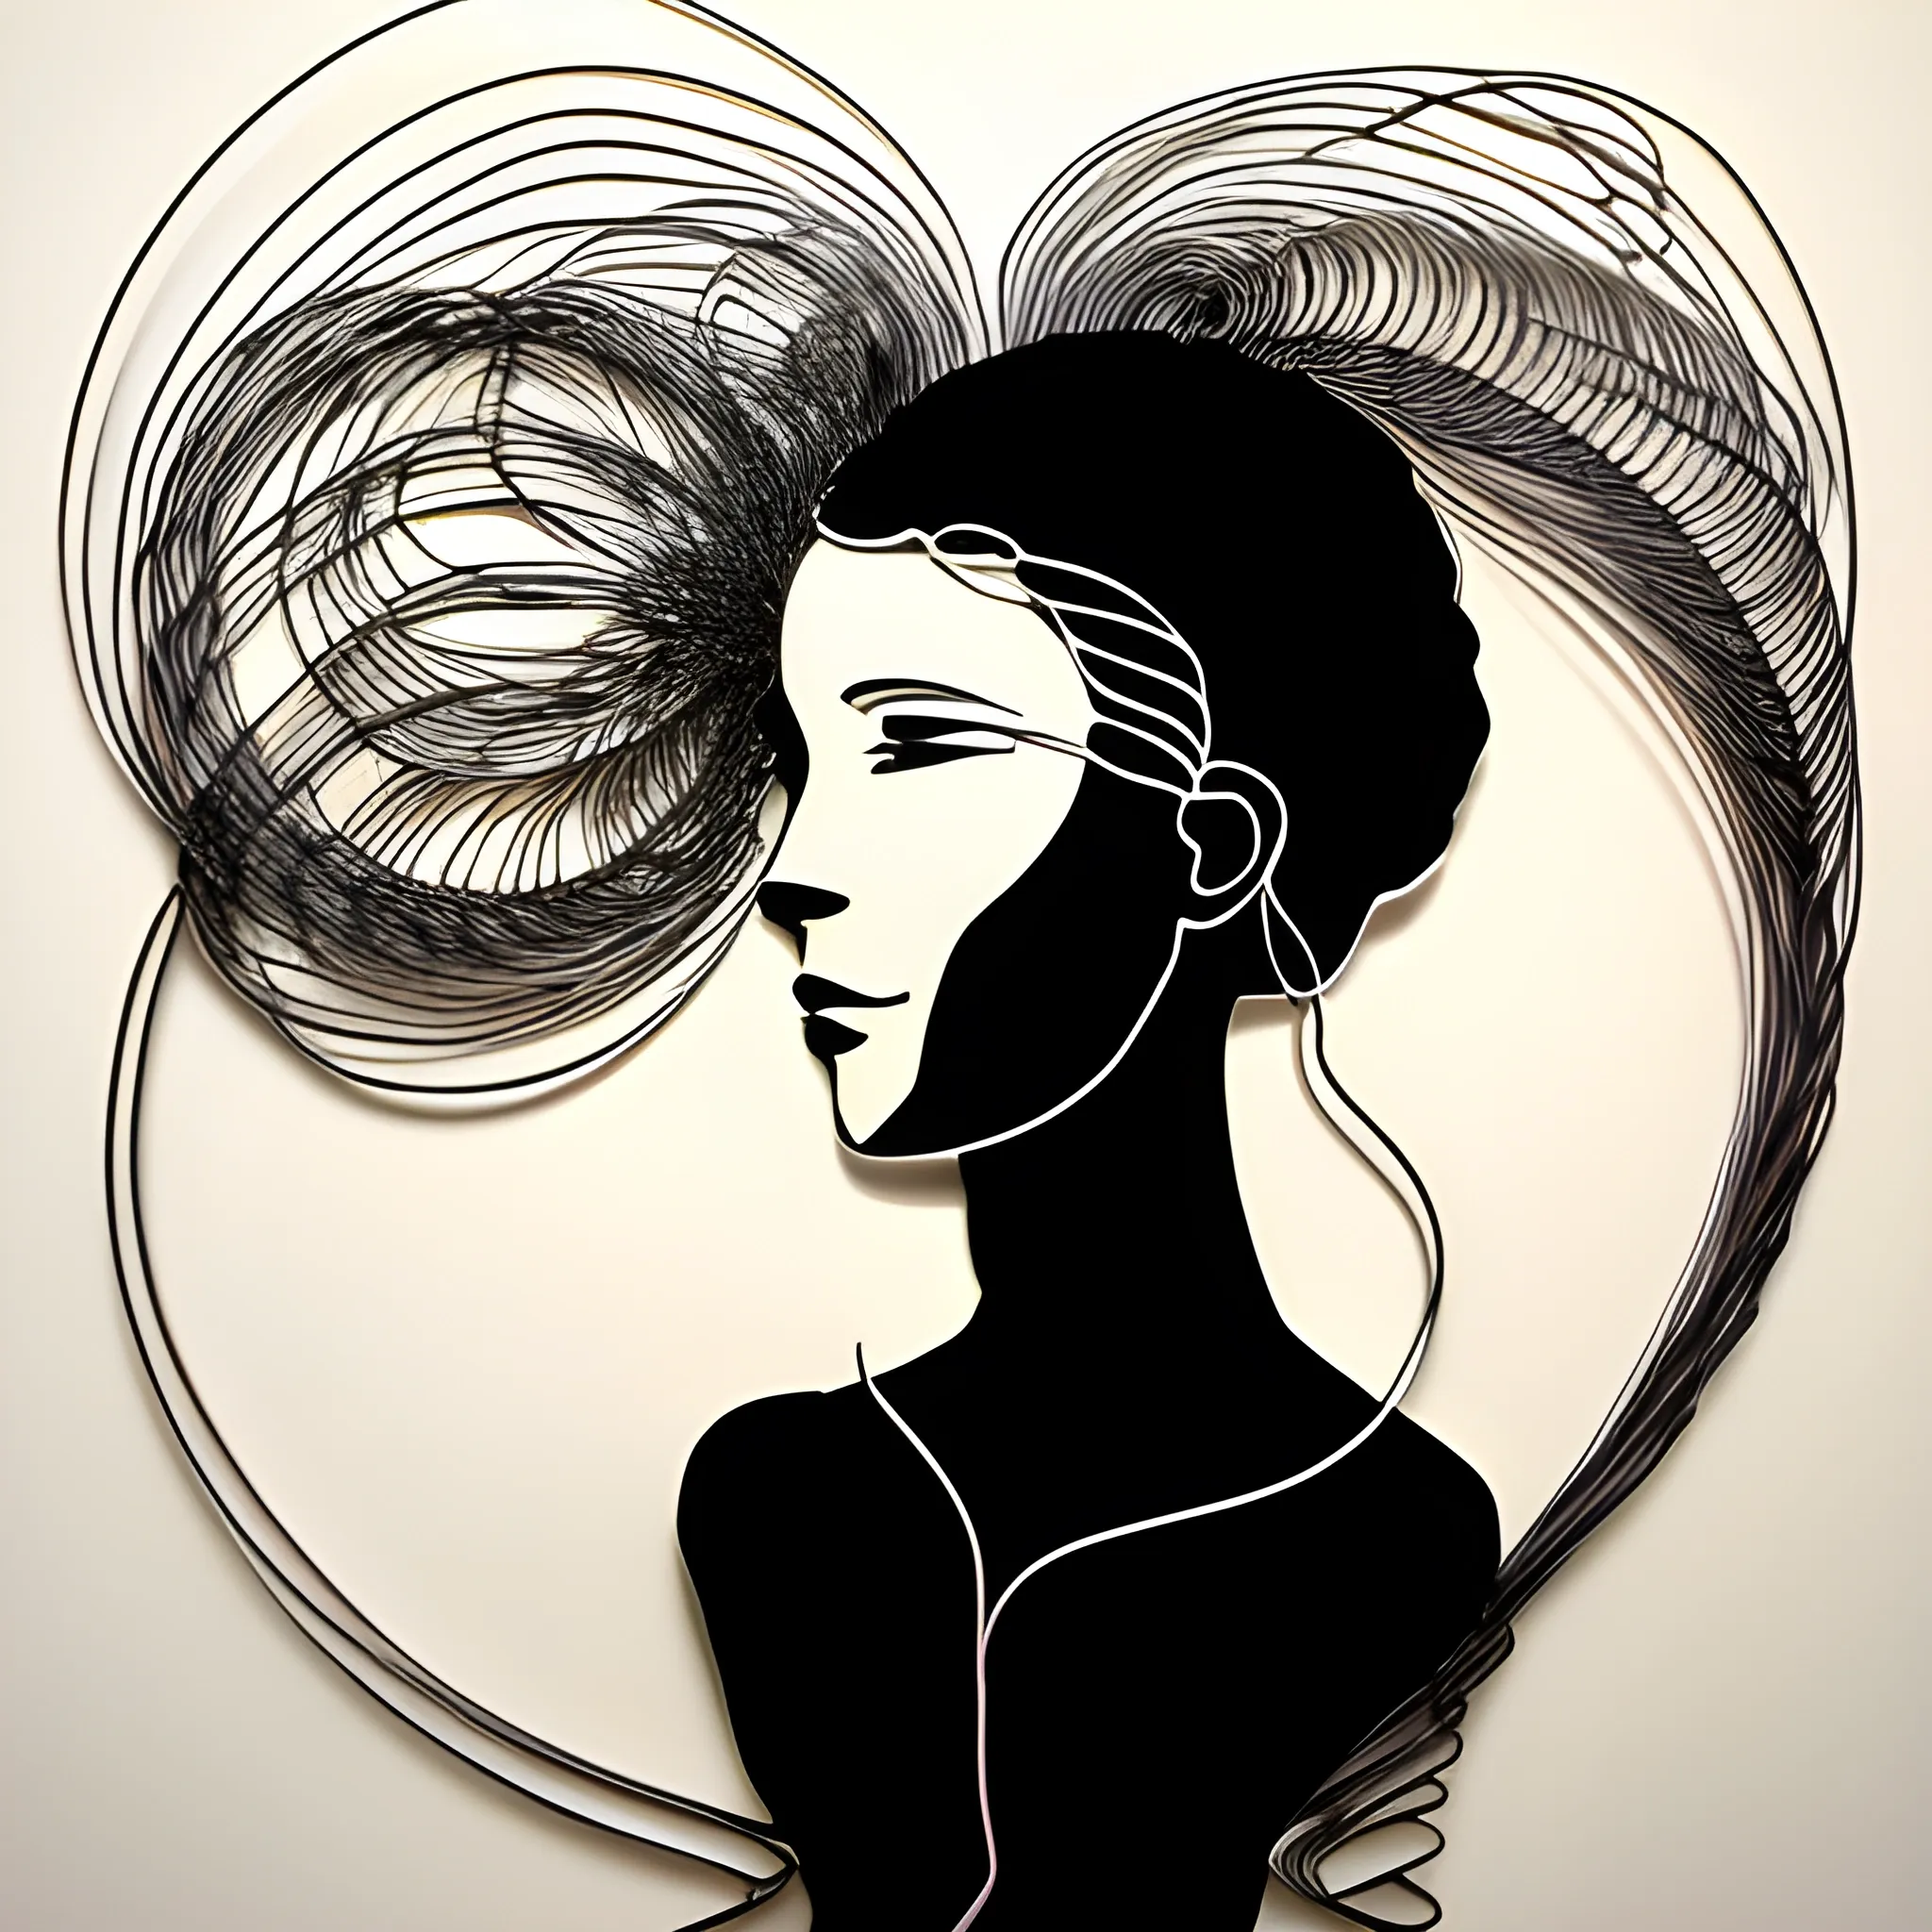 complex wire art, emotional female features, silhouette, one line drawings, curves, twirls and spirals